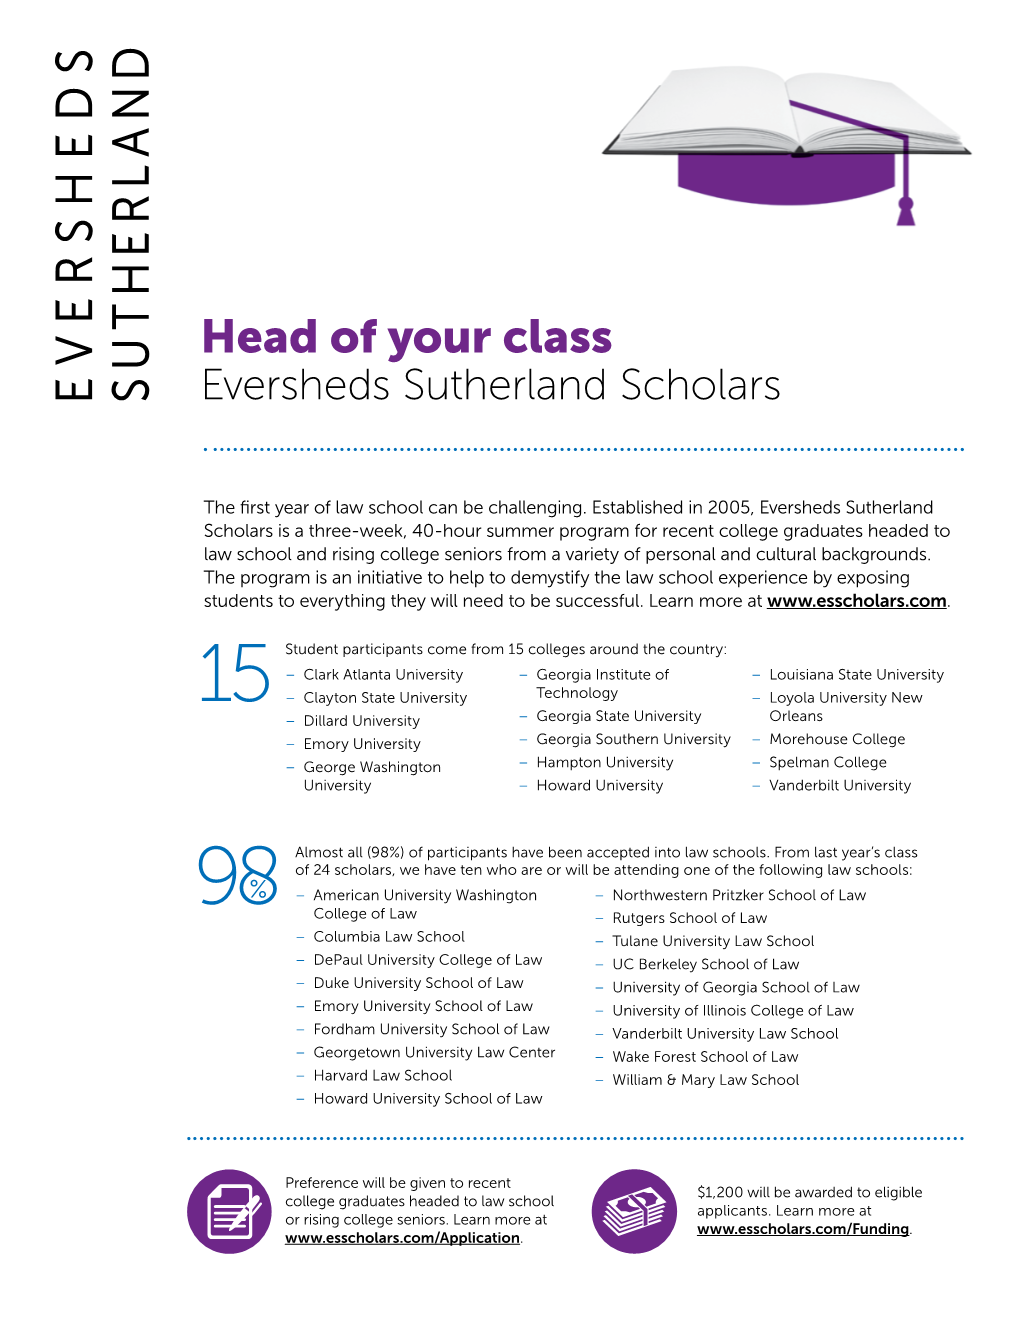 Head of Your Class Eversheds Sutherland Scholars